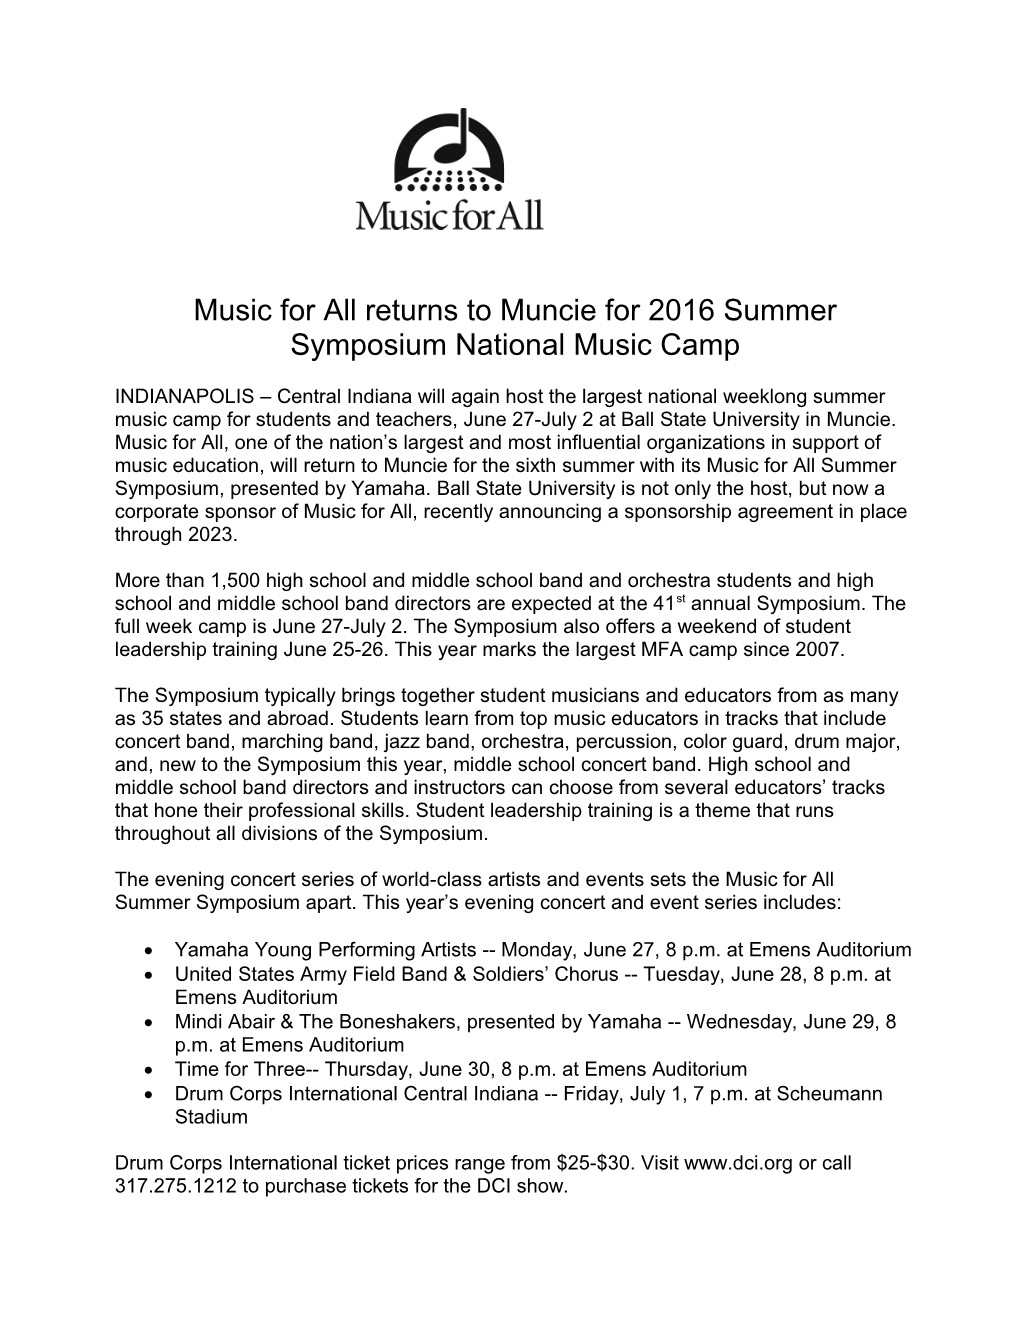 Music for All Returns to Muncie for 2016 Summer Symposium National Music Camp